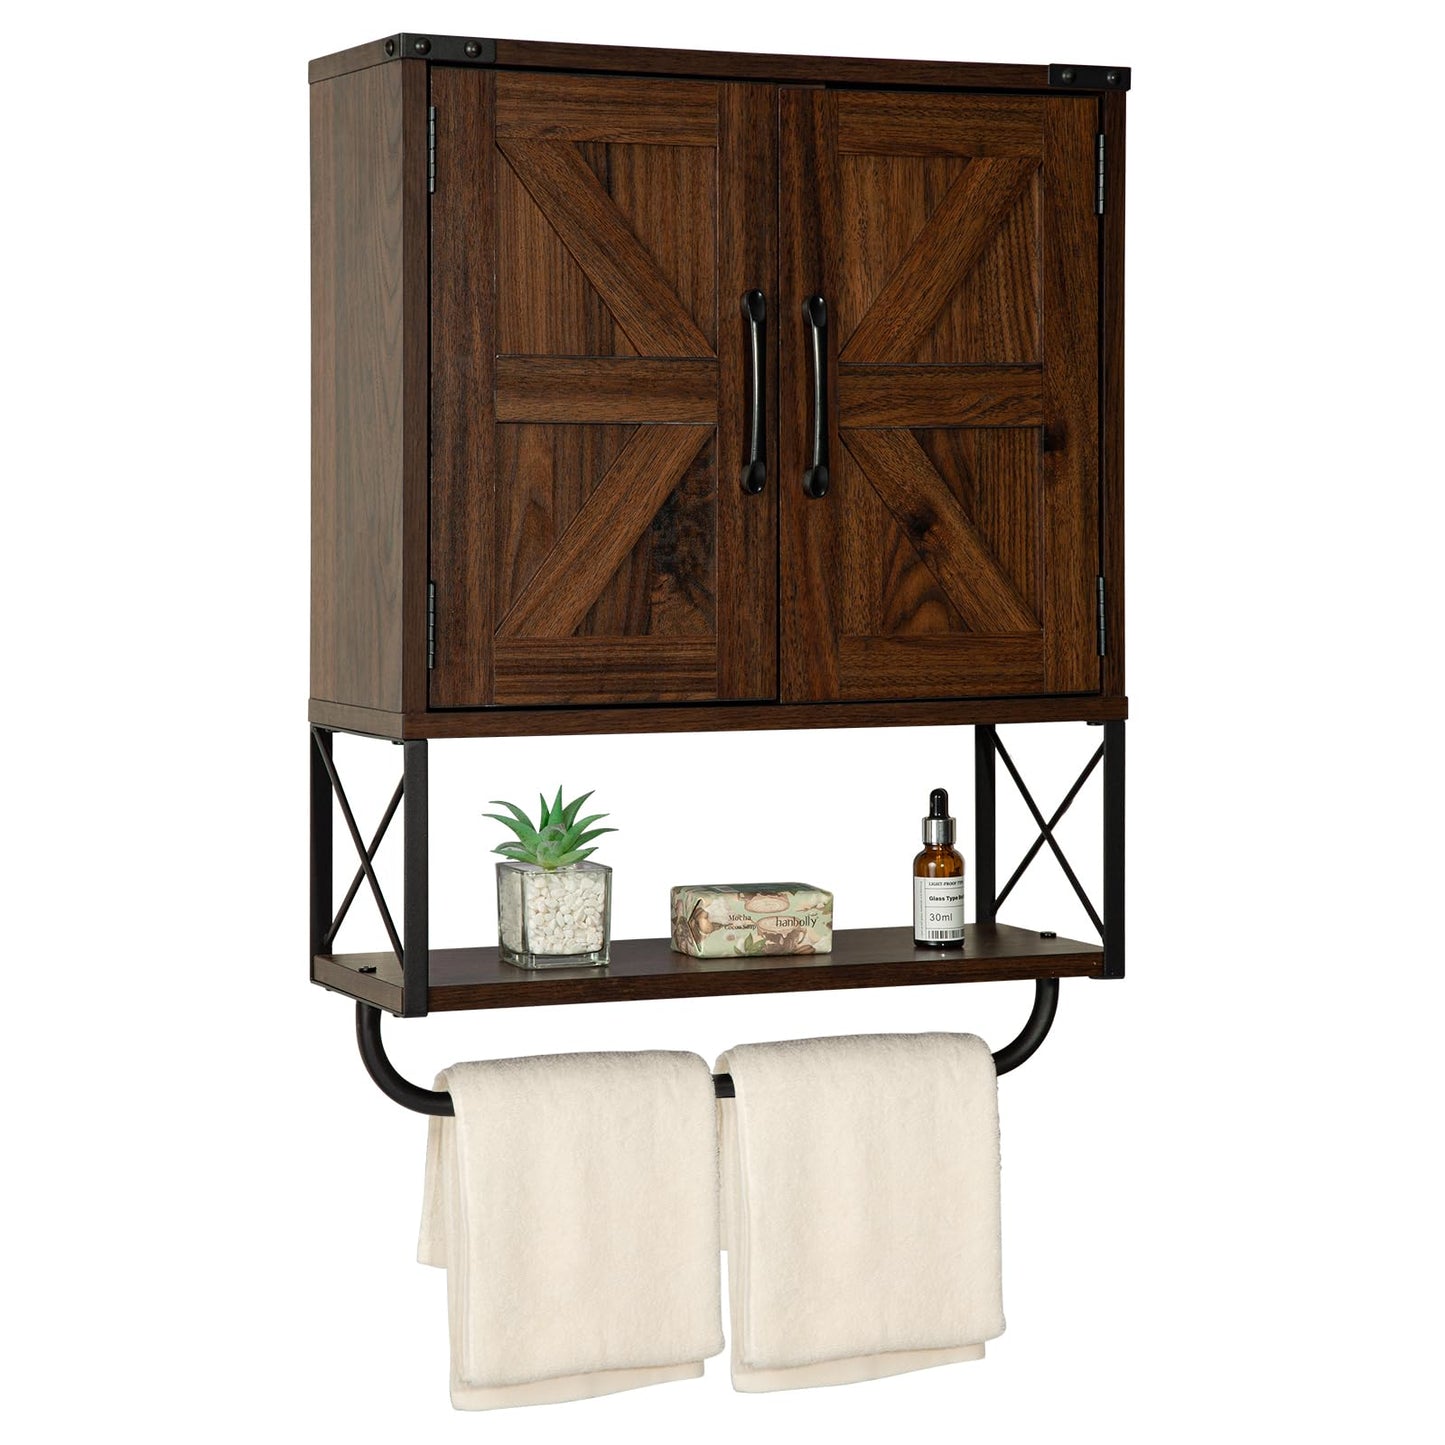 RUSTOWN Farmhouse Medicine Cabinet with 2 Barn Door,Wood Wall Mounted Storage Cabinet with Adjustable Shelf and Towel Bar, 3-Tier Bathroom Cabinet